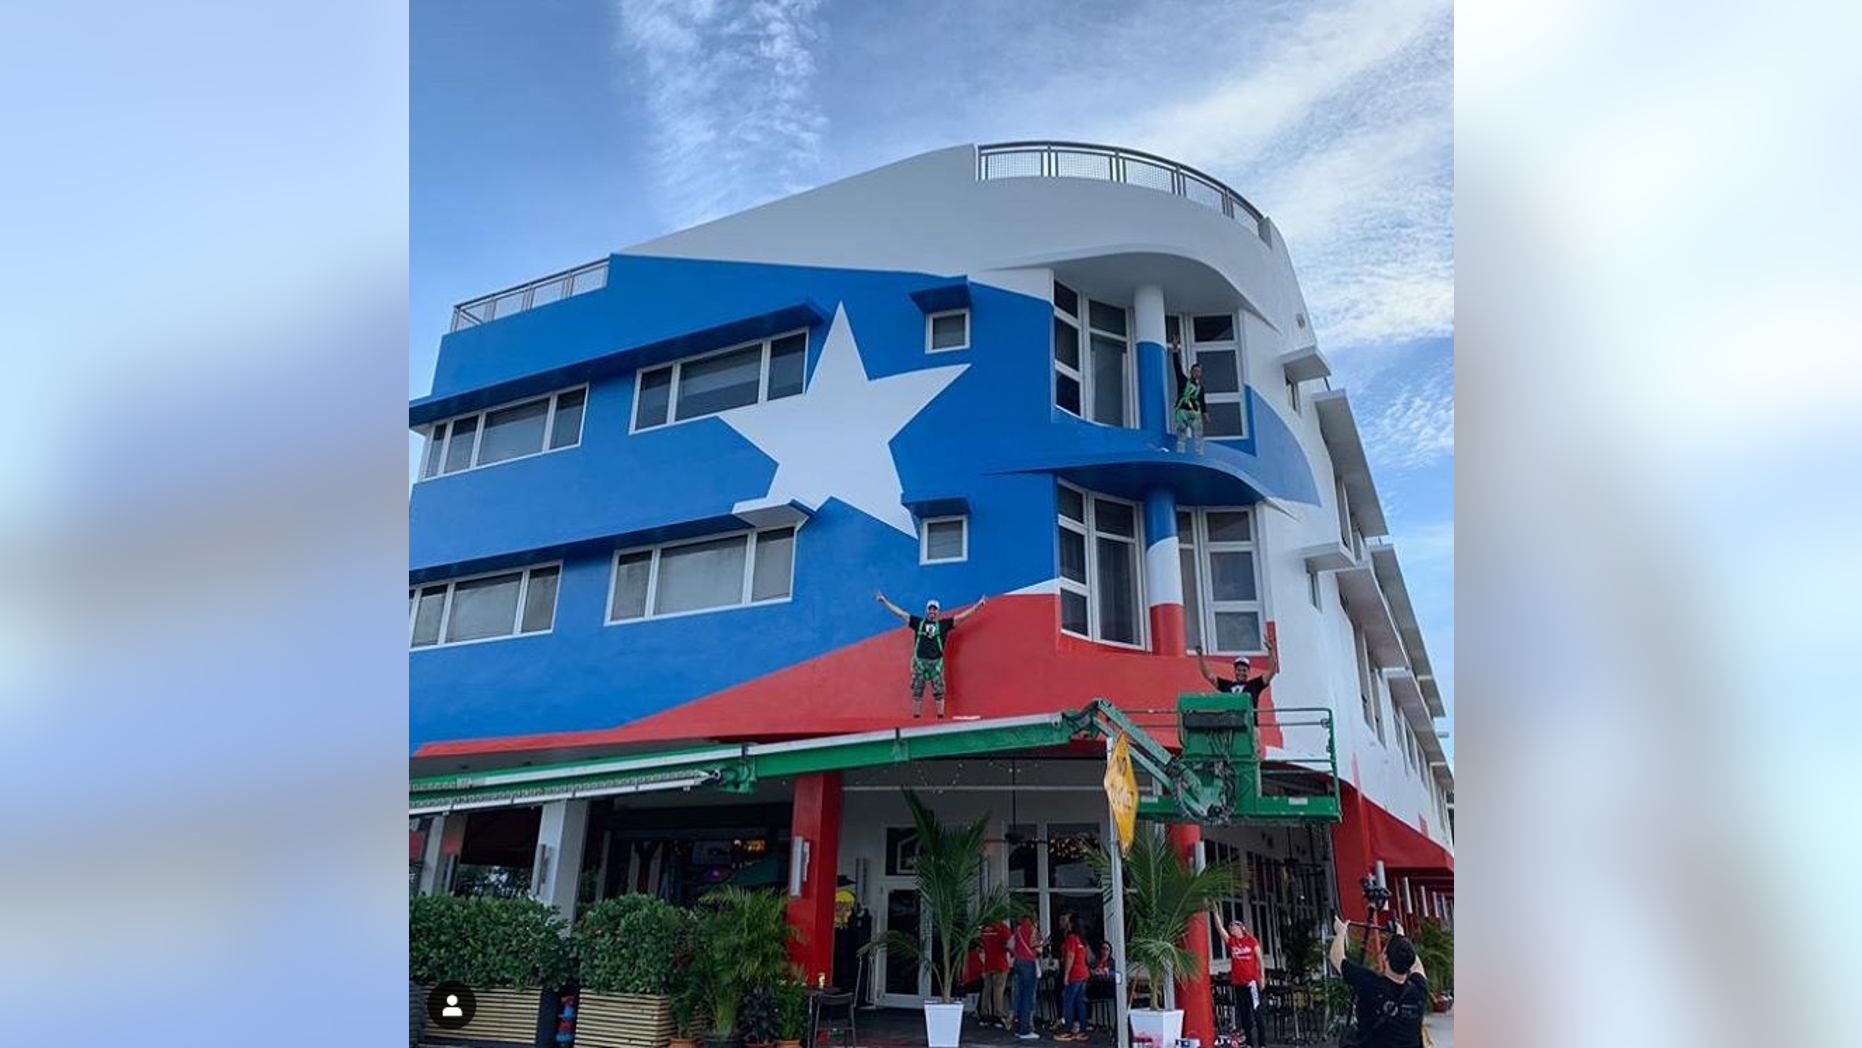 Puerto Rico flag mural must go due to lack of permit, Miami officials tell restaurant owners